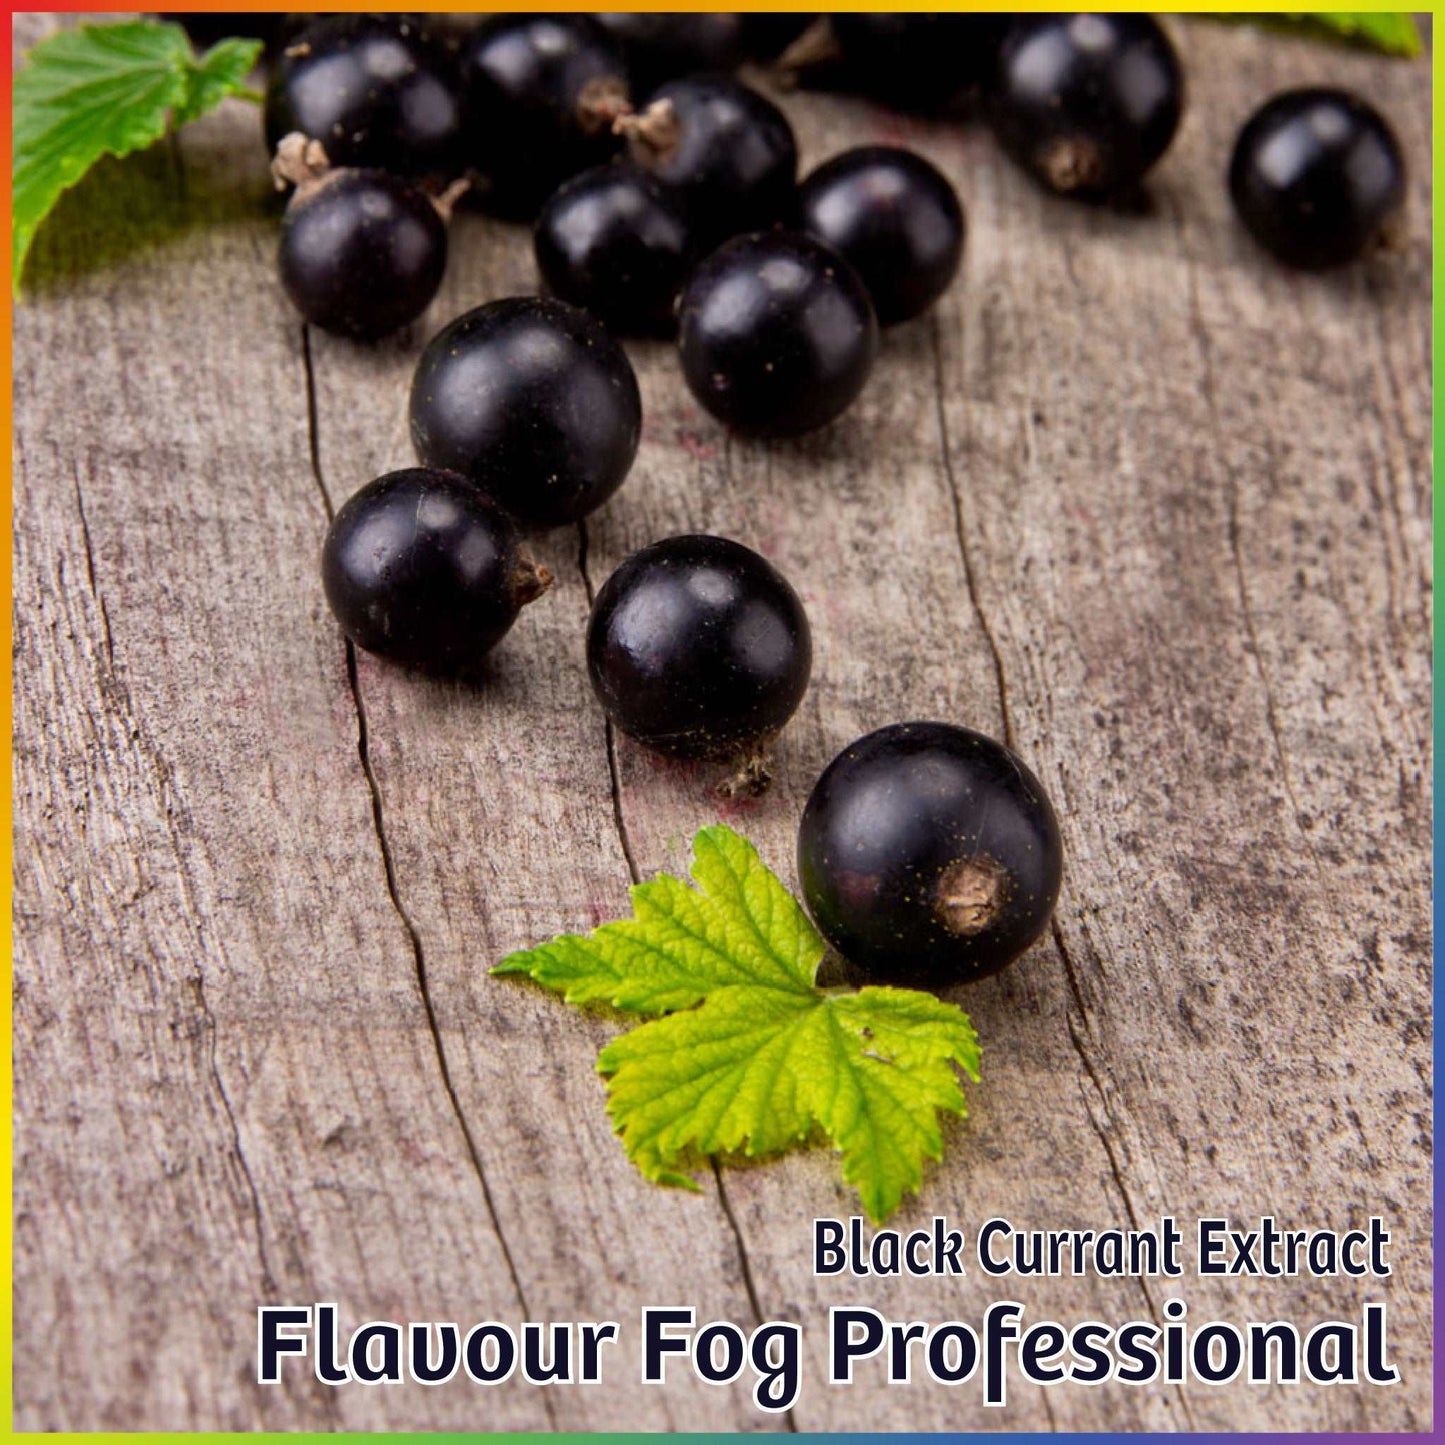 Black Currant Extract - FF Pro - Flavour Fog - Canada's flavour depot.